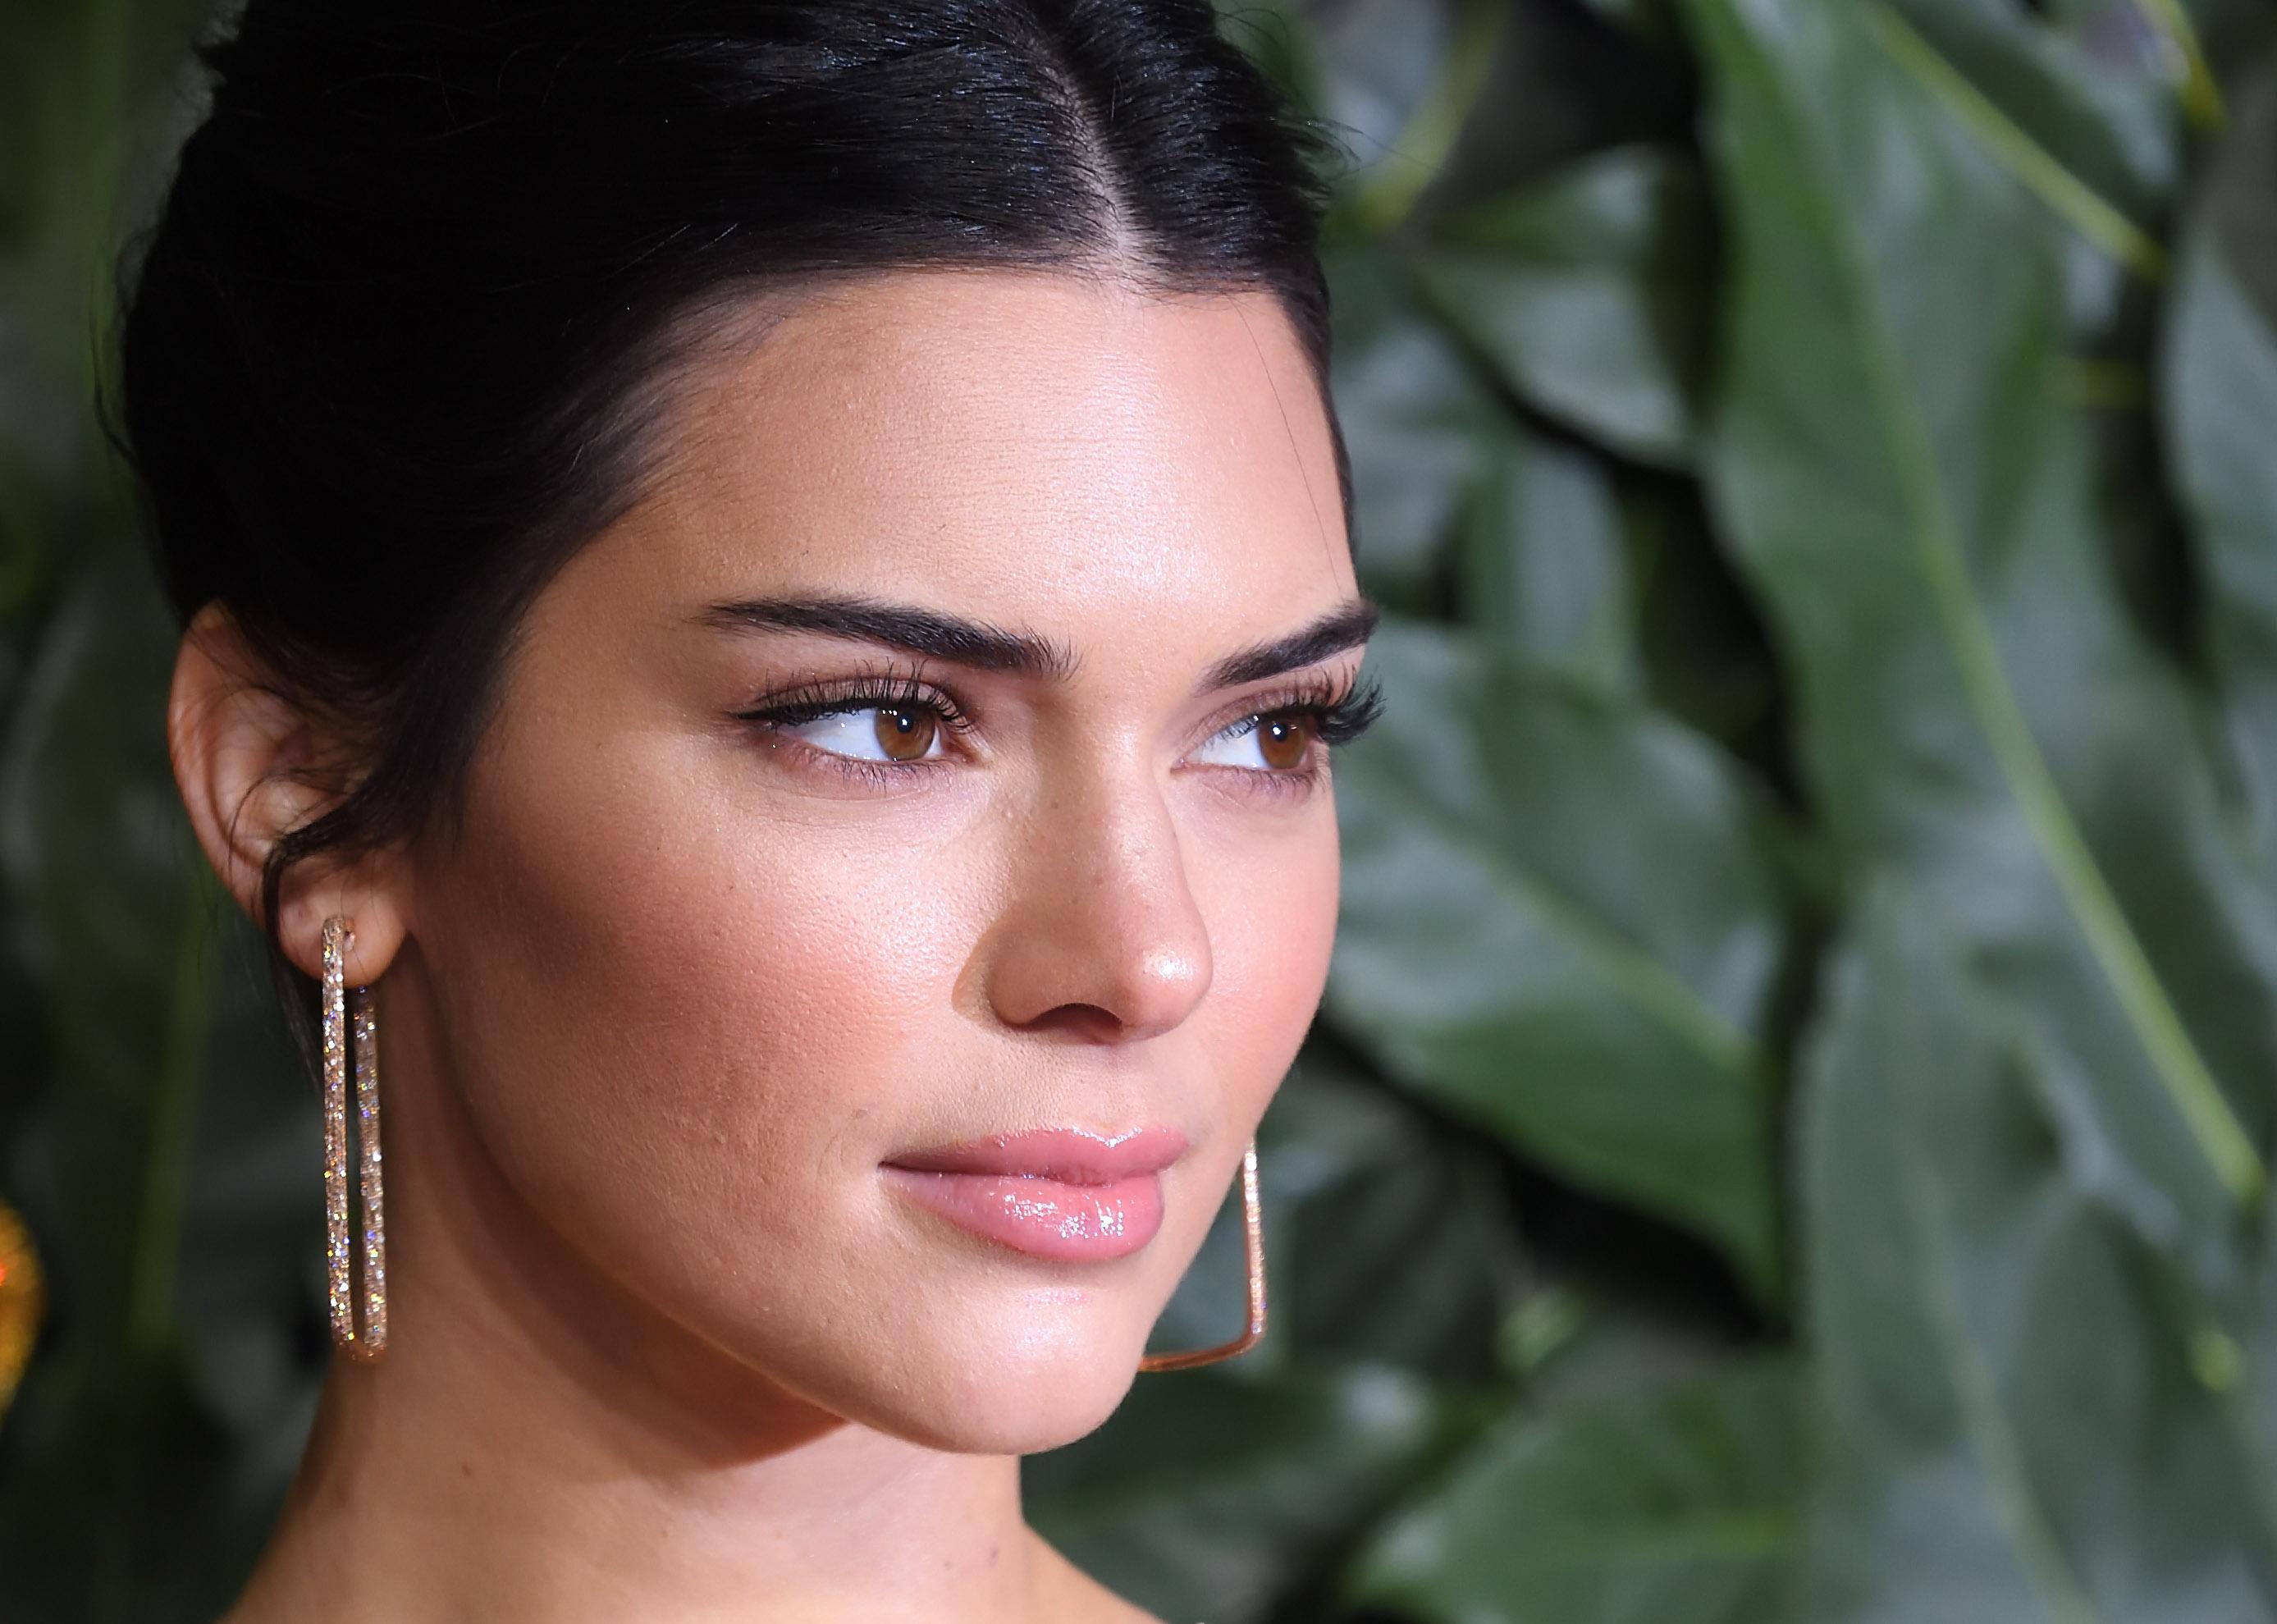 The Reasons We Never Really Know About Kendall Jenner’s Love Life